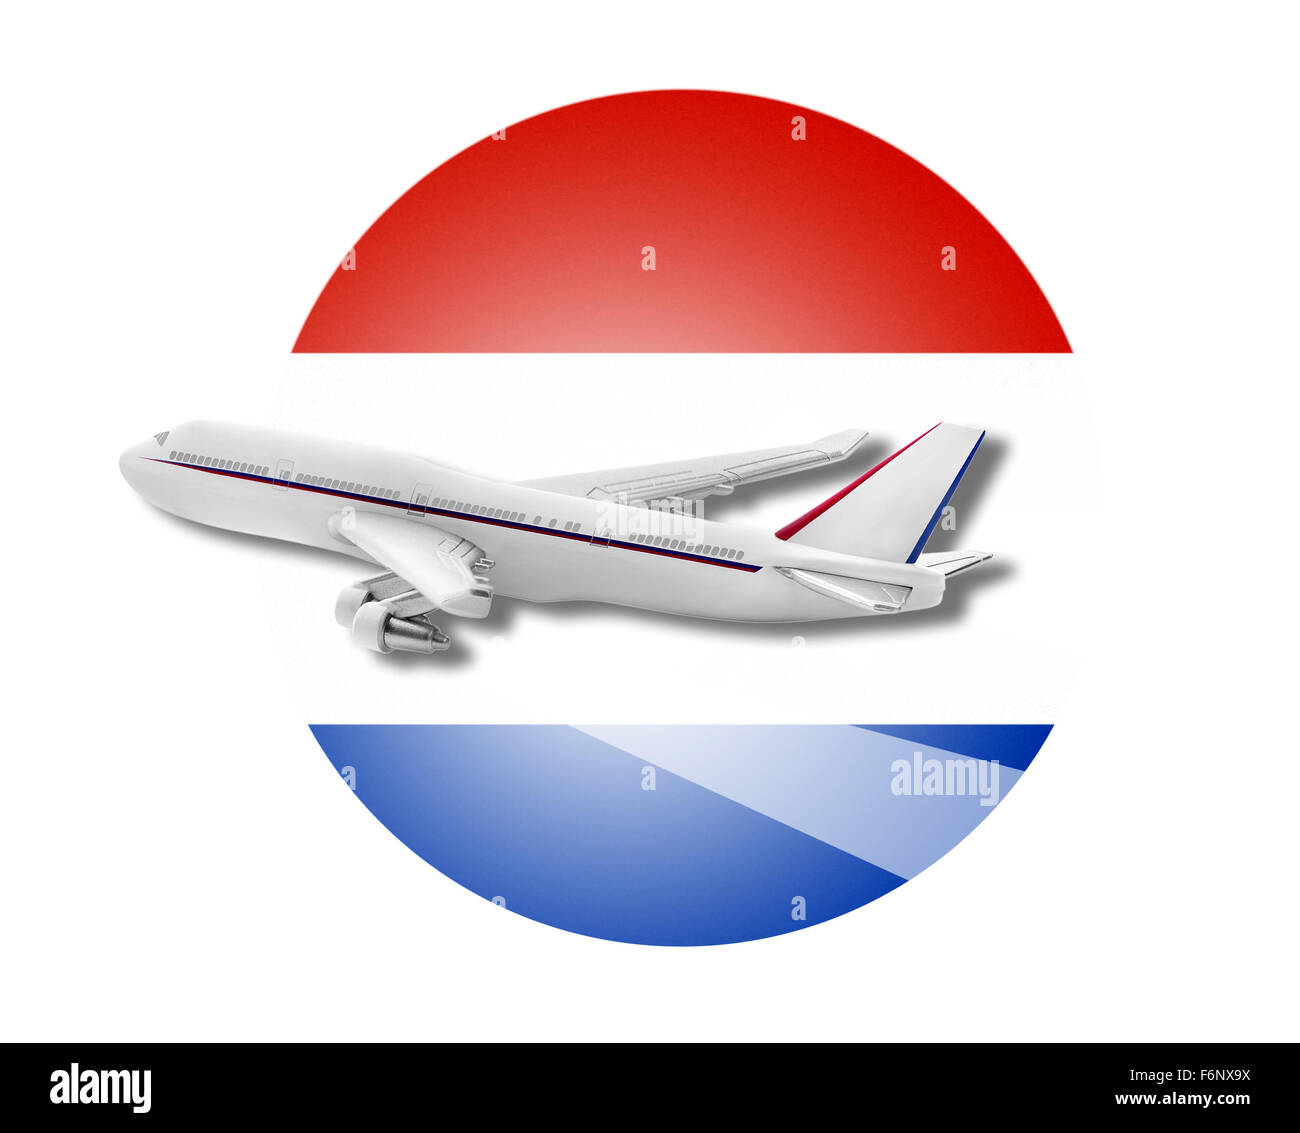 Plane and Paraguay flag. Stock Photo